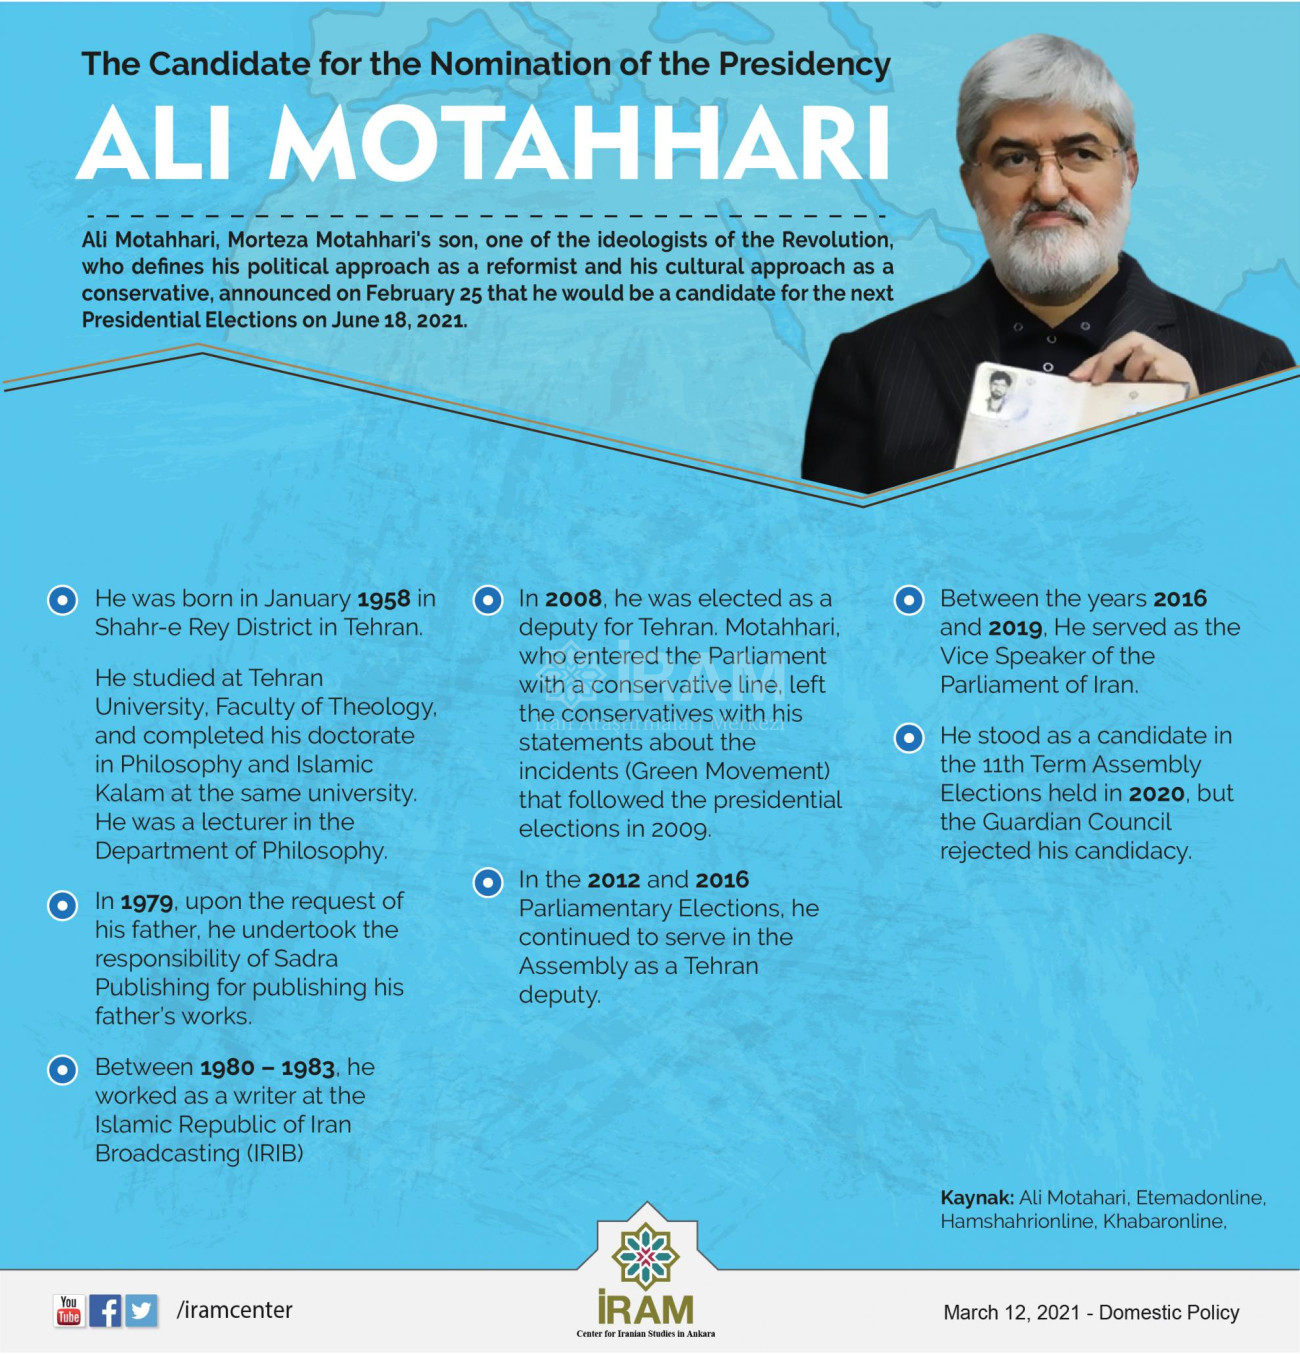 The Candidate for the Nomination of the Presidency: Ali Motahhari